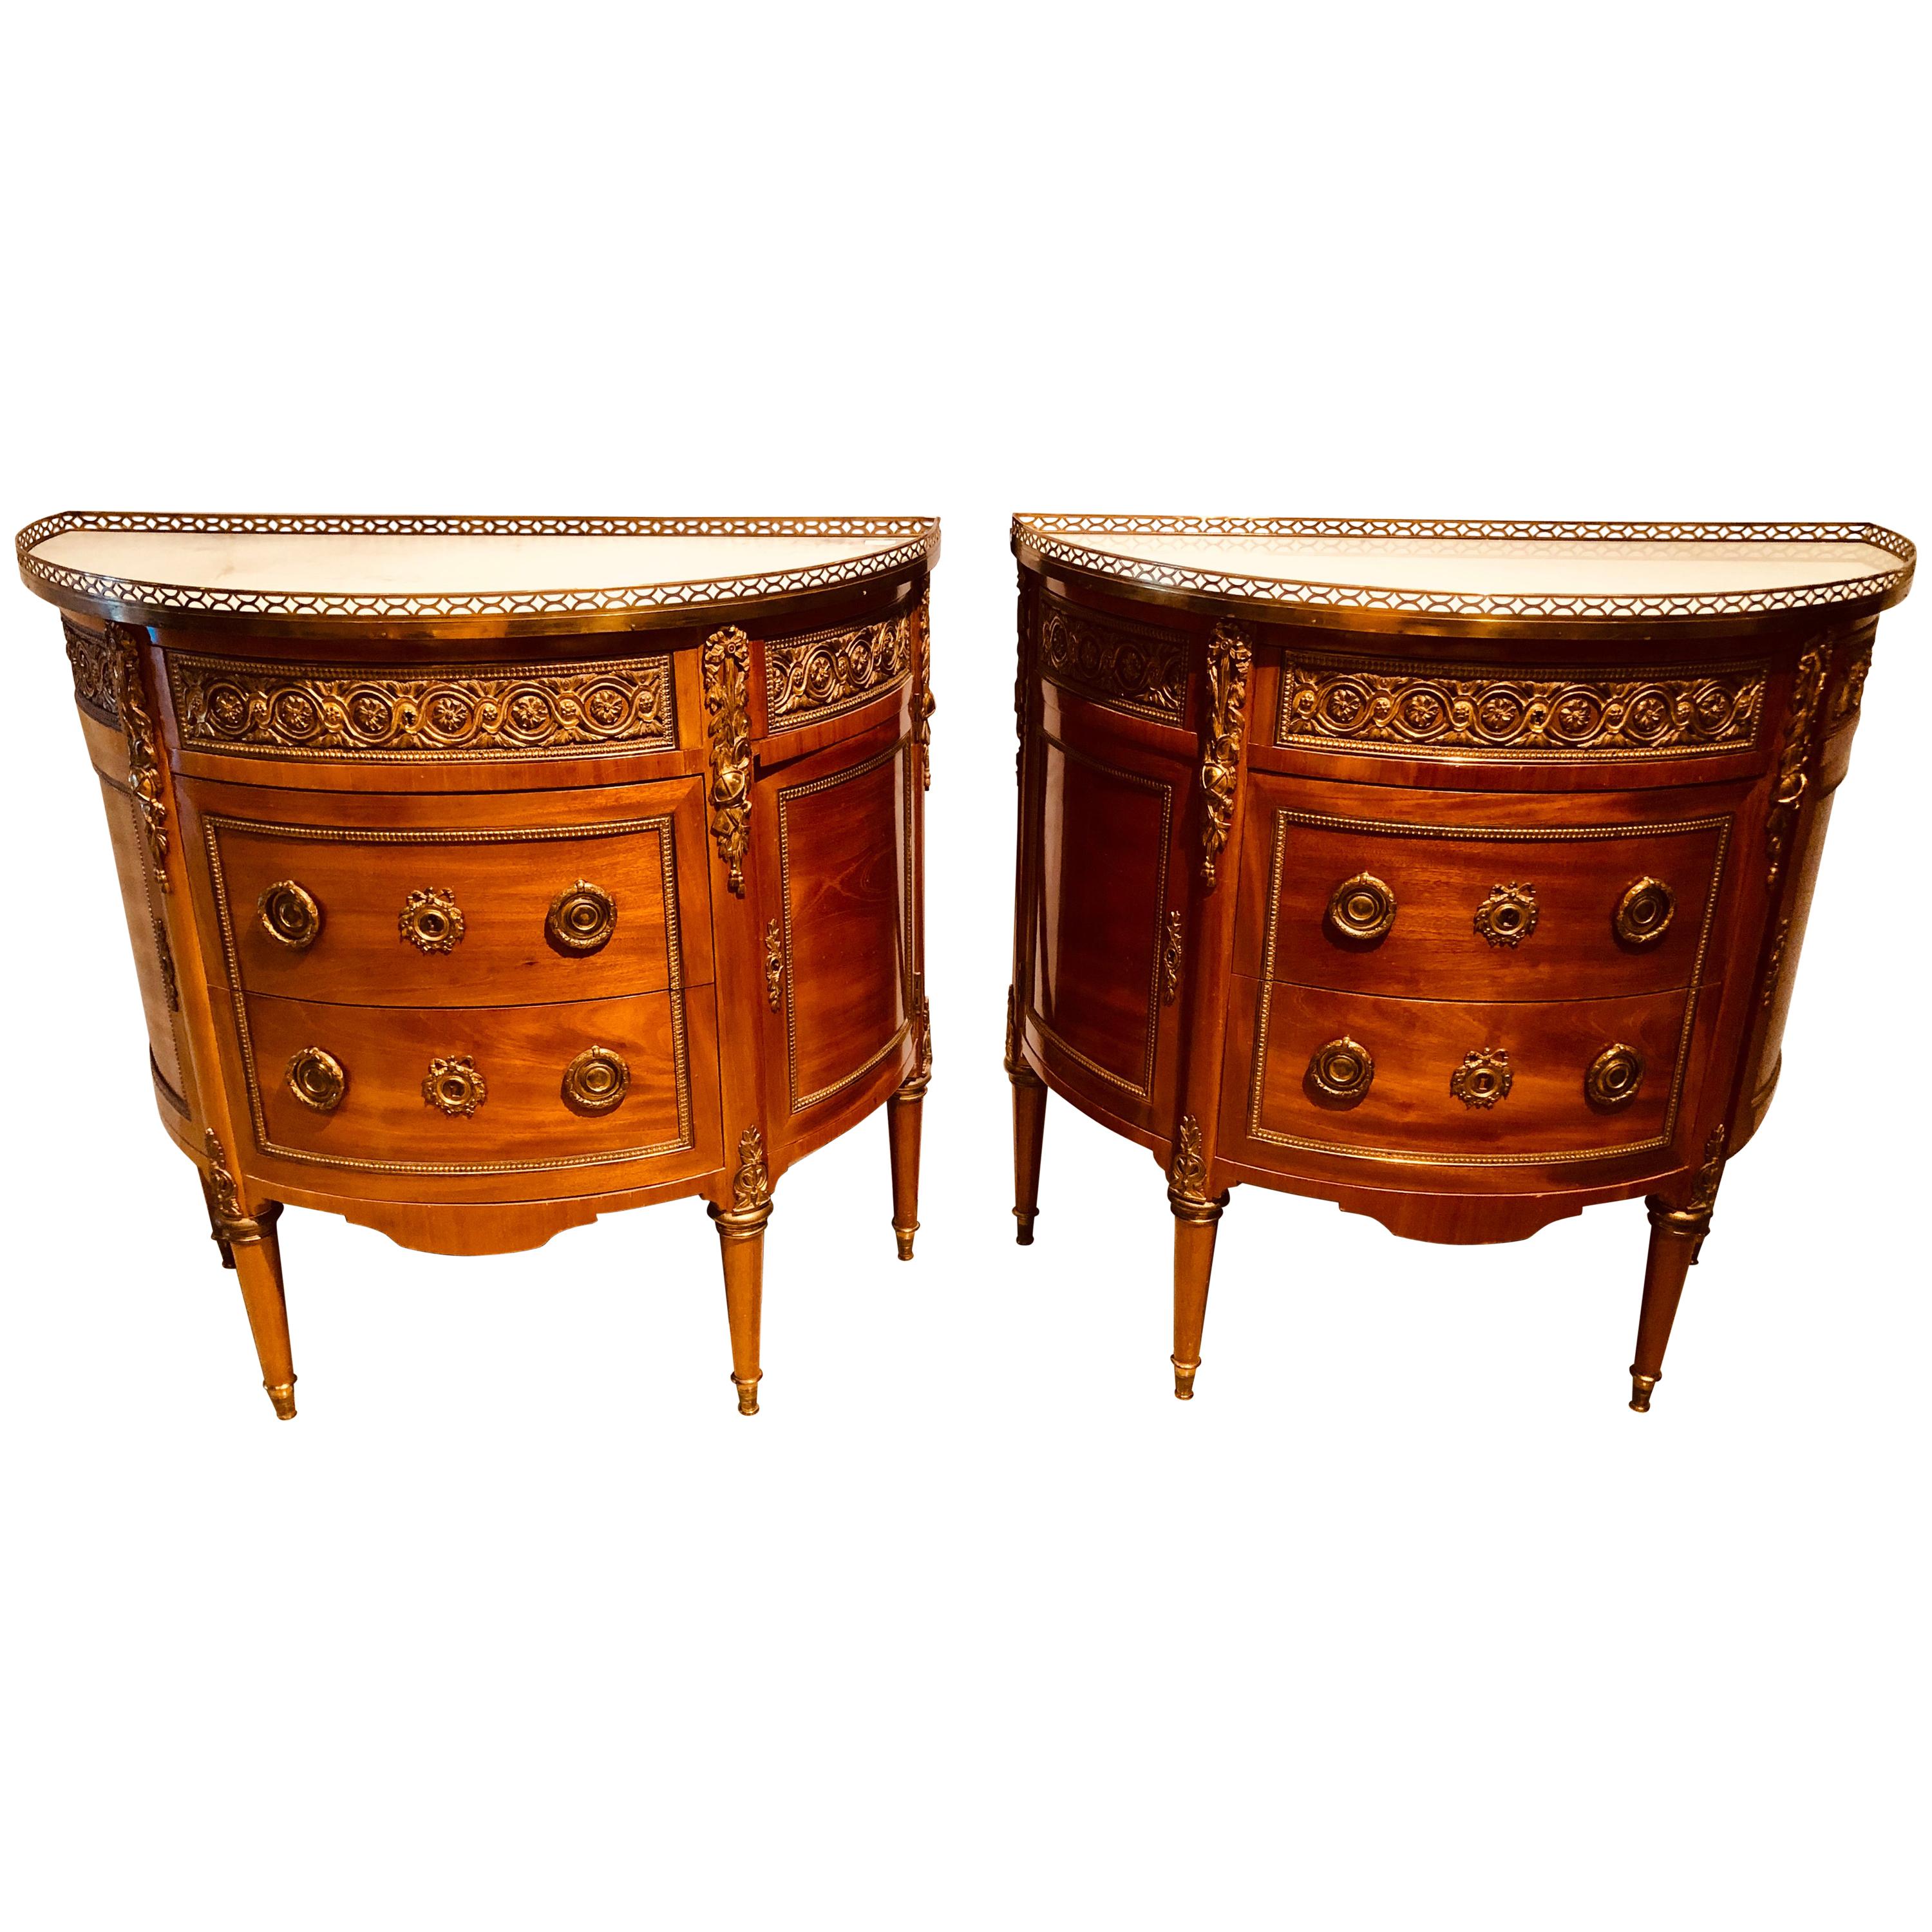 Pair of 19th Century Bronze Mounted French Demilune Commodes with Marble Tops